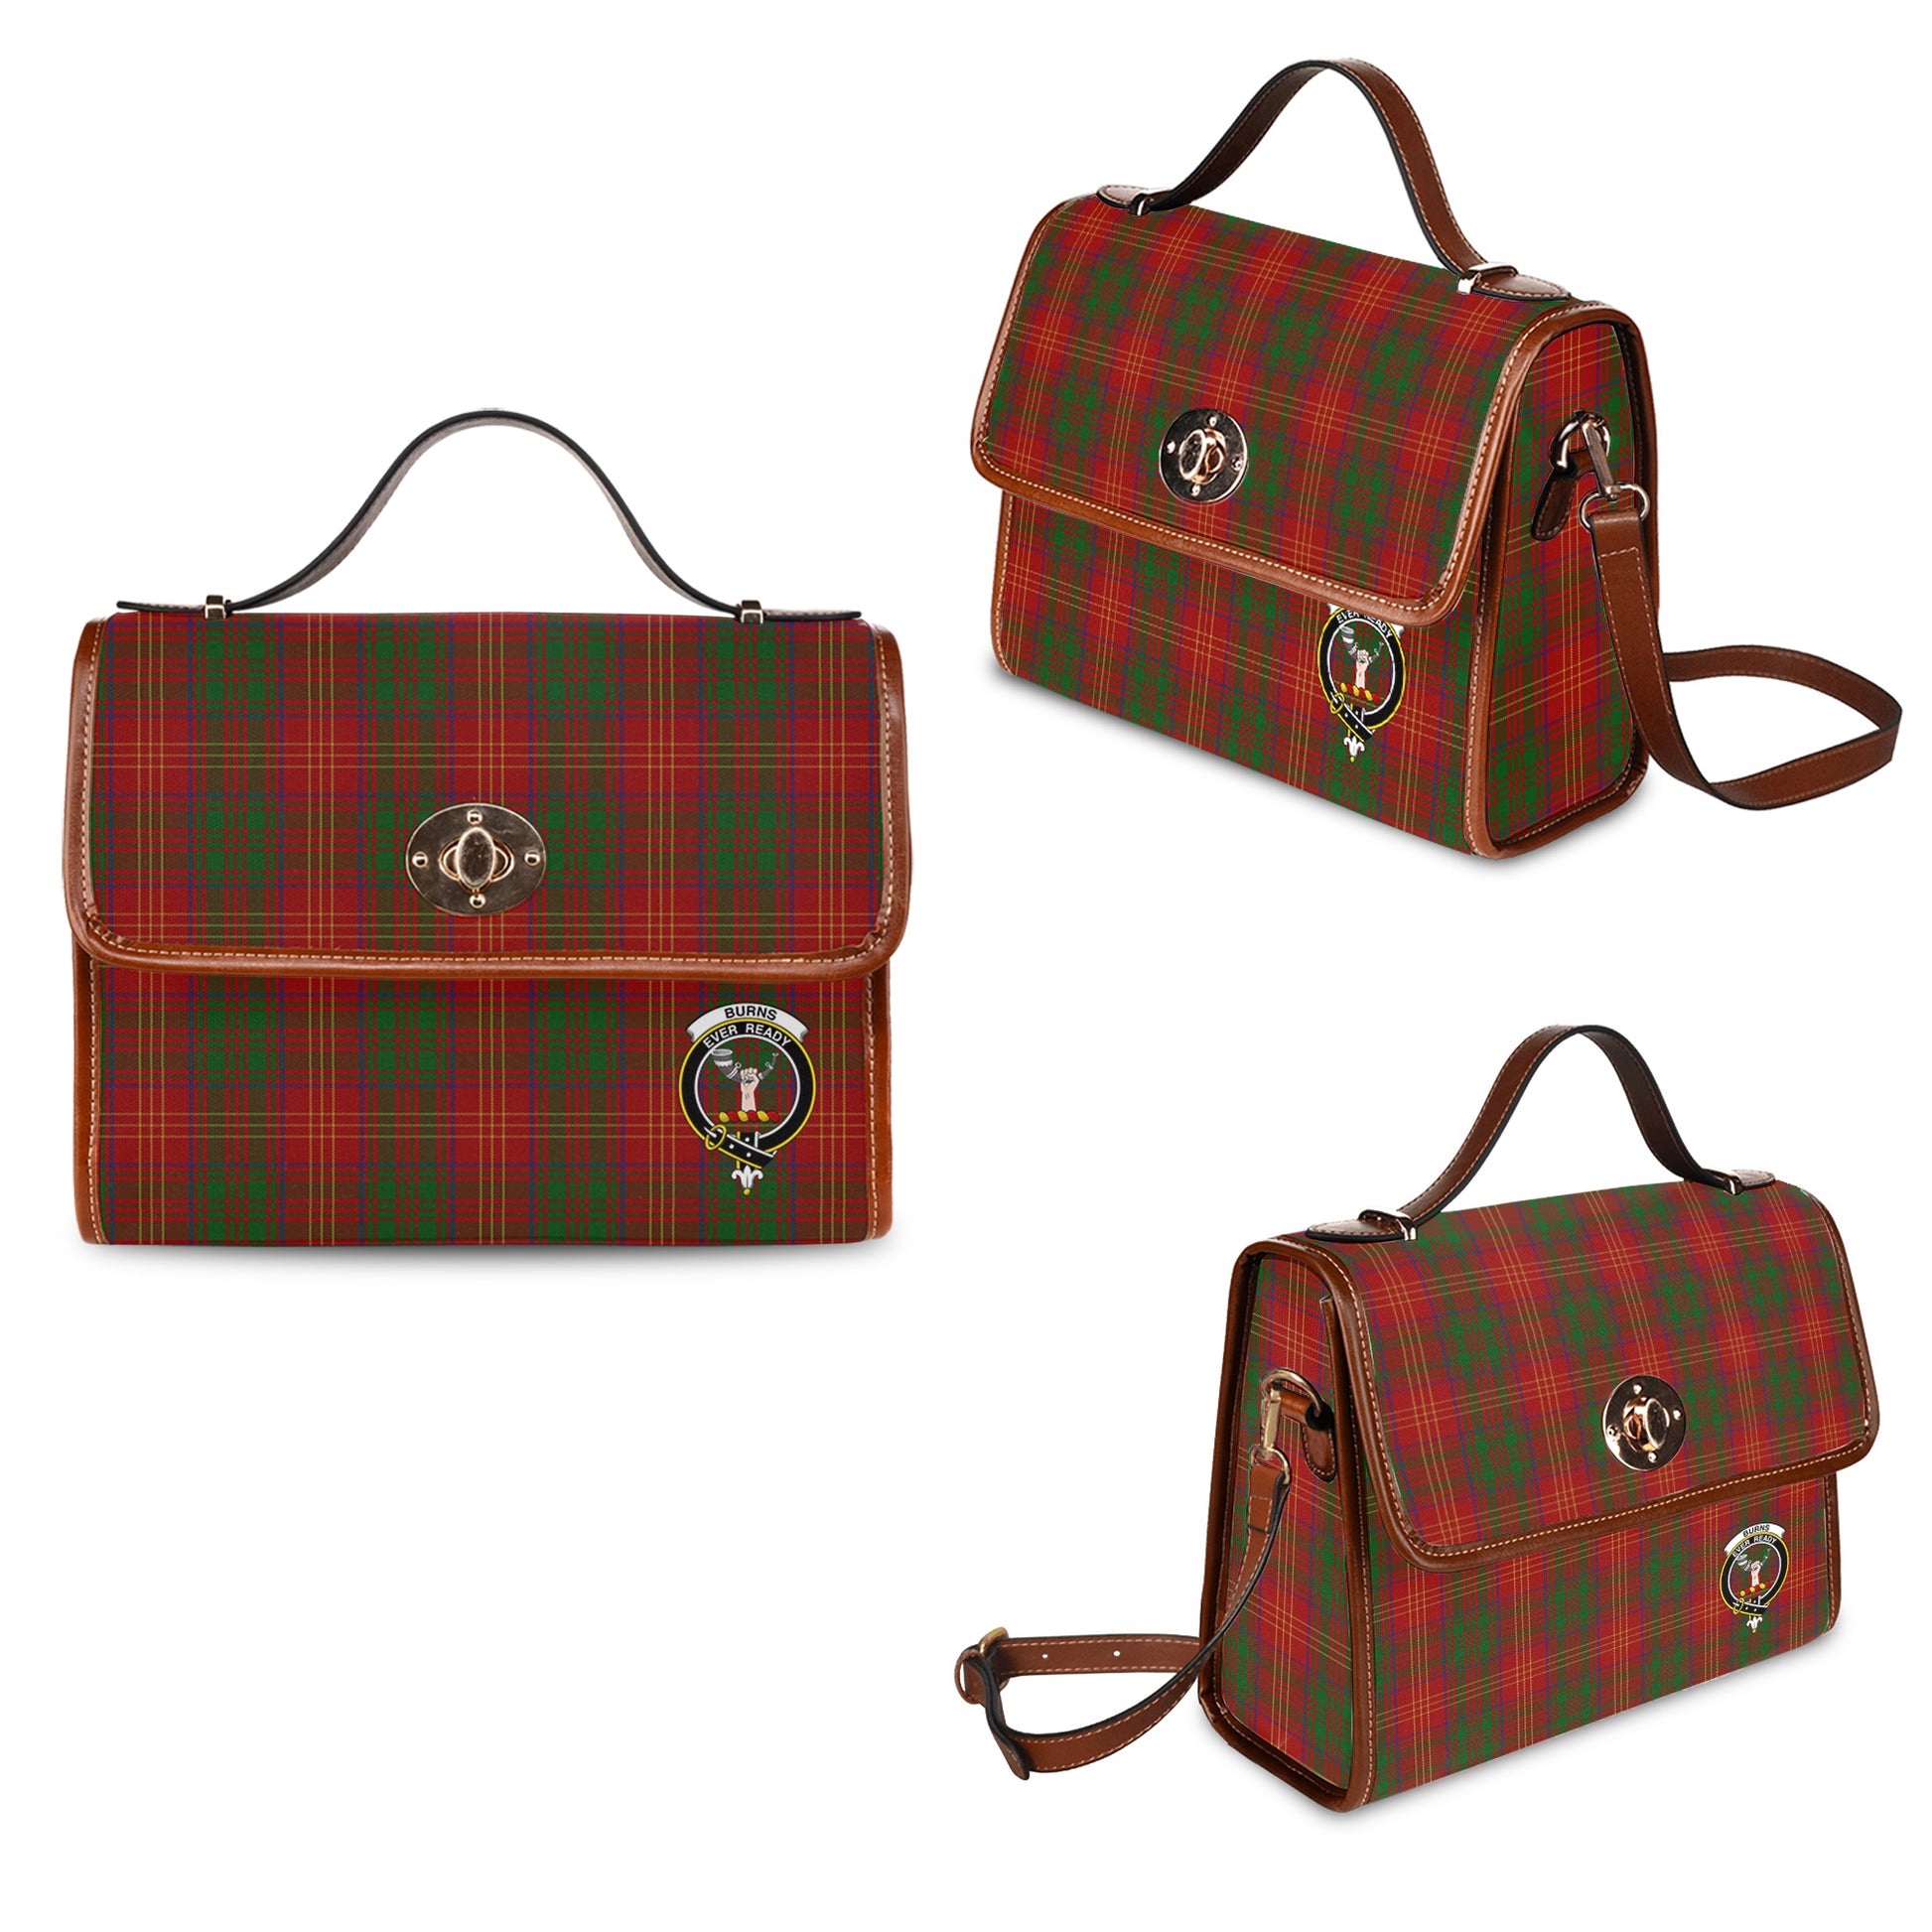 Burns Tartan Leather Strap Waterproof Canvas Bag with Family Crest One Size 34cm * 42cm (13.4" x 16.5")